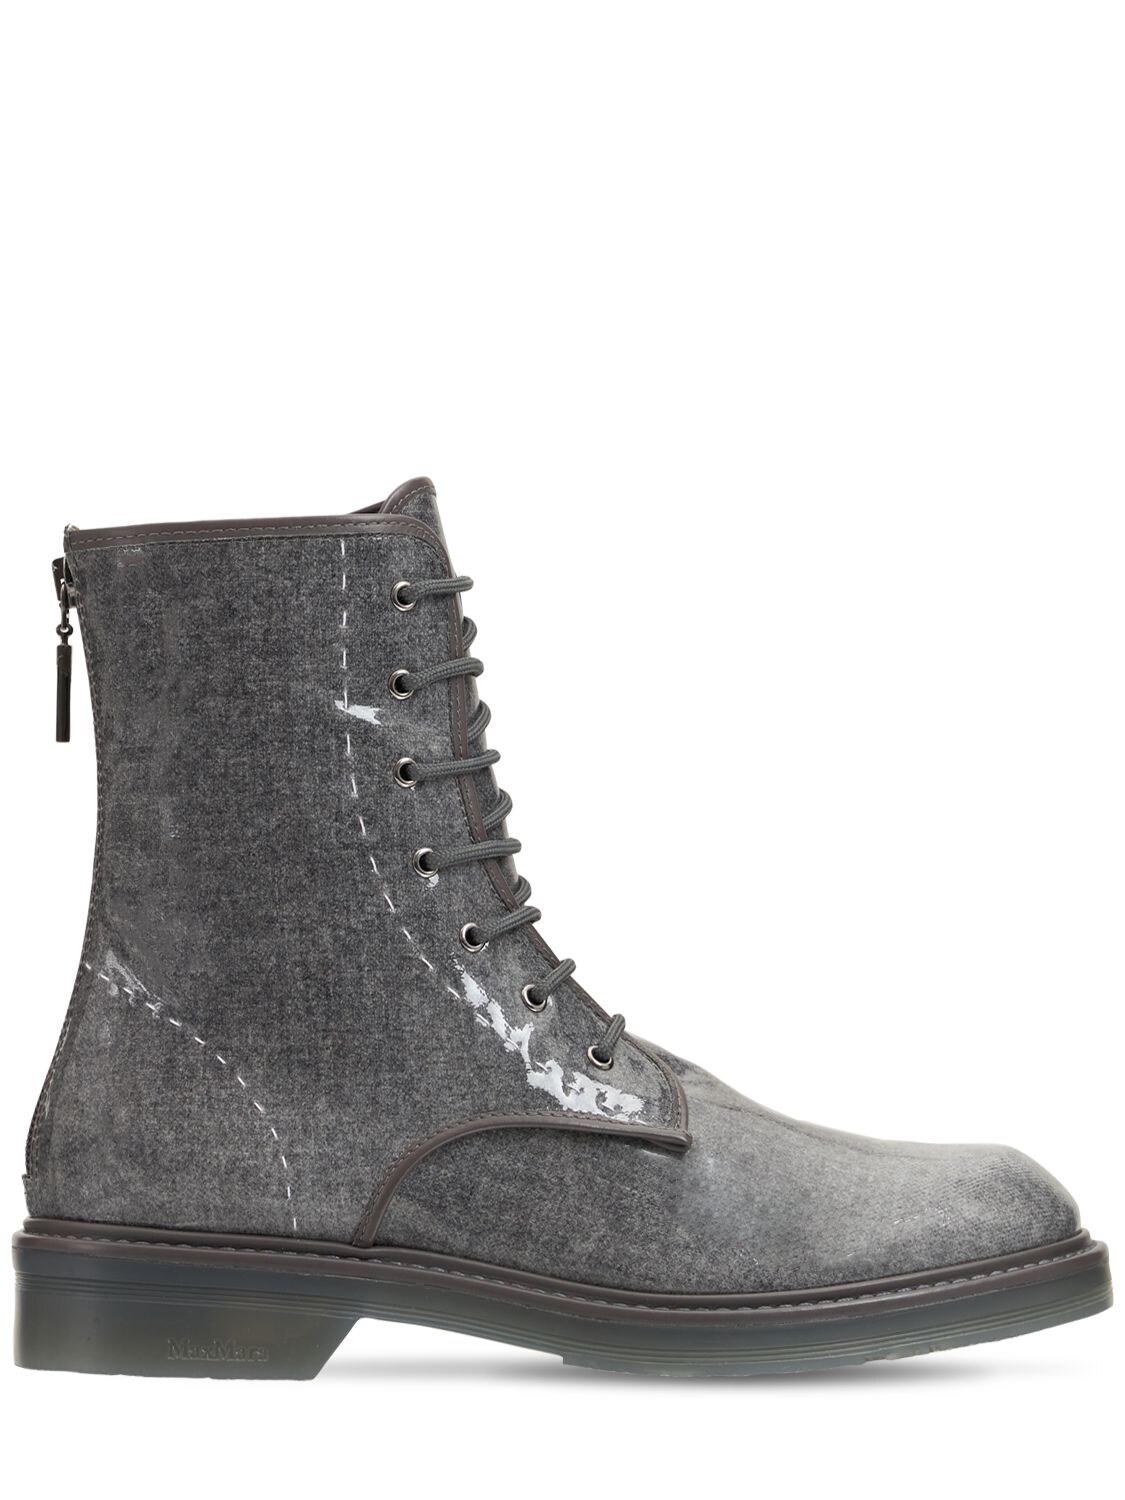 MAX MARA 30mm Beth Waxed Wool Blend Ankle Boots